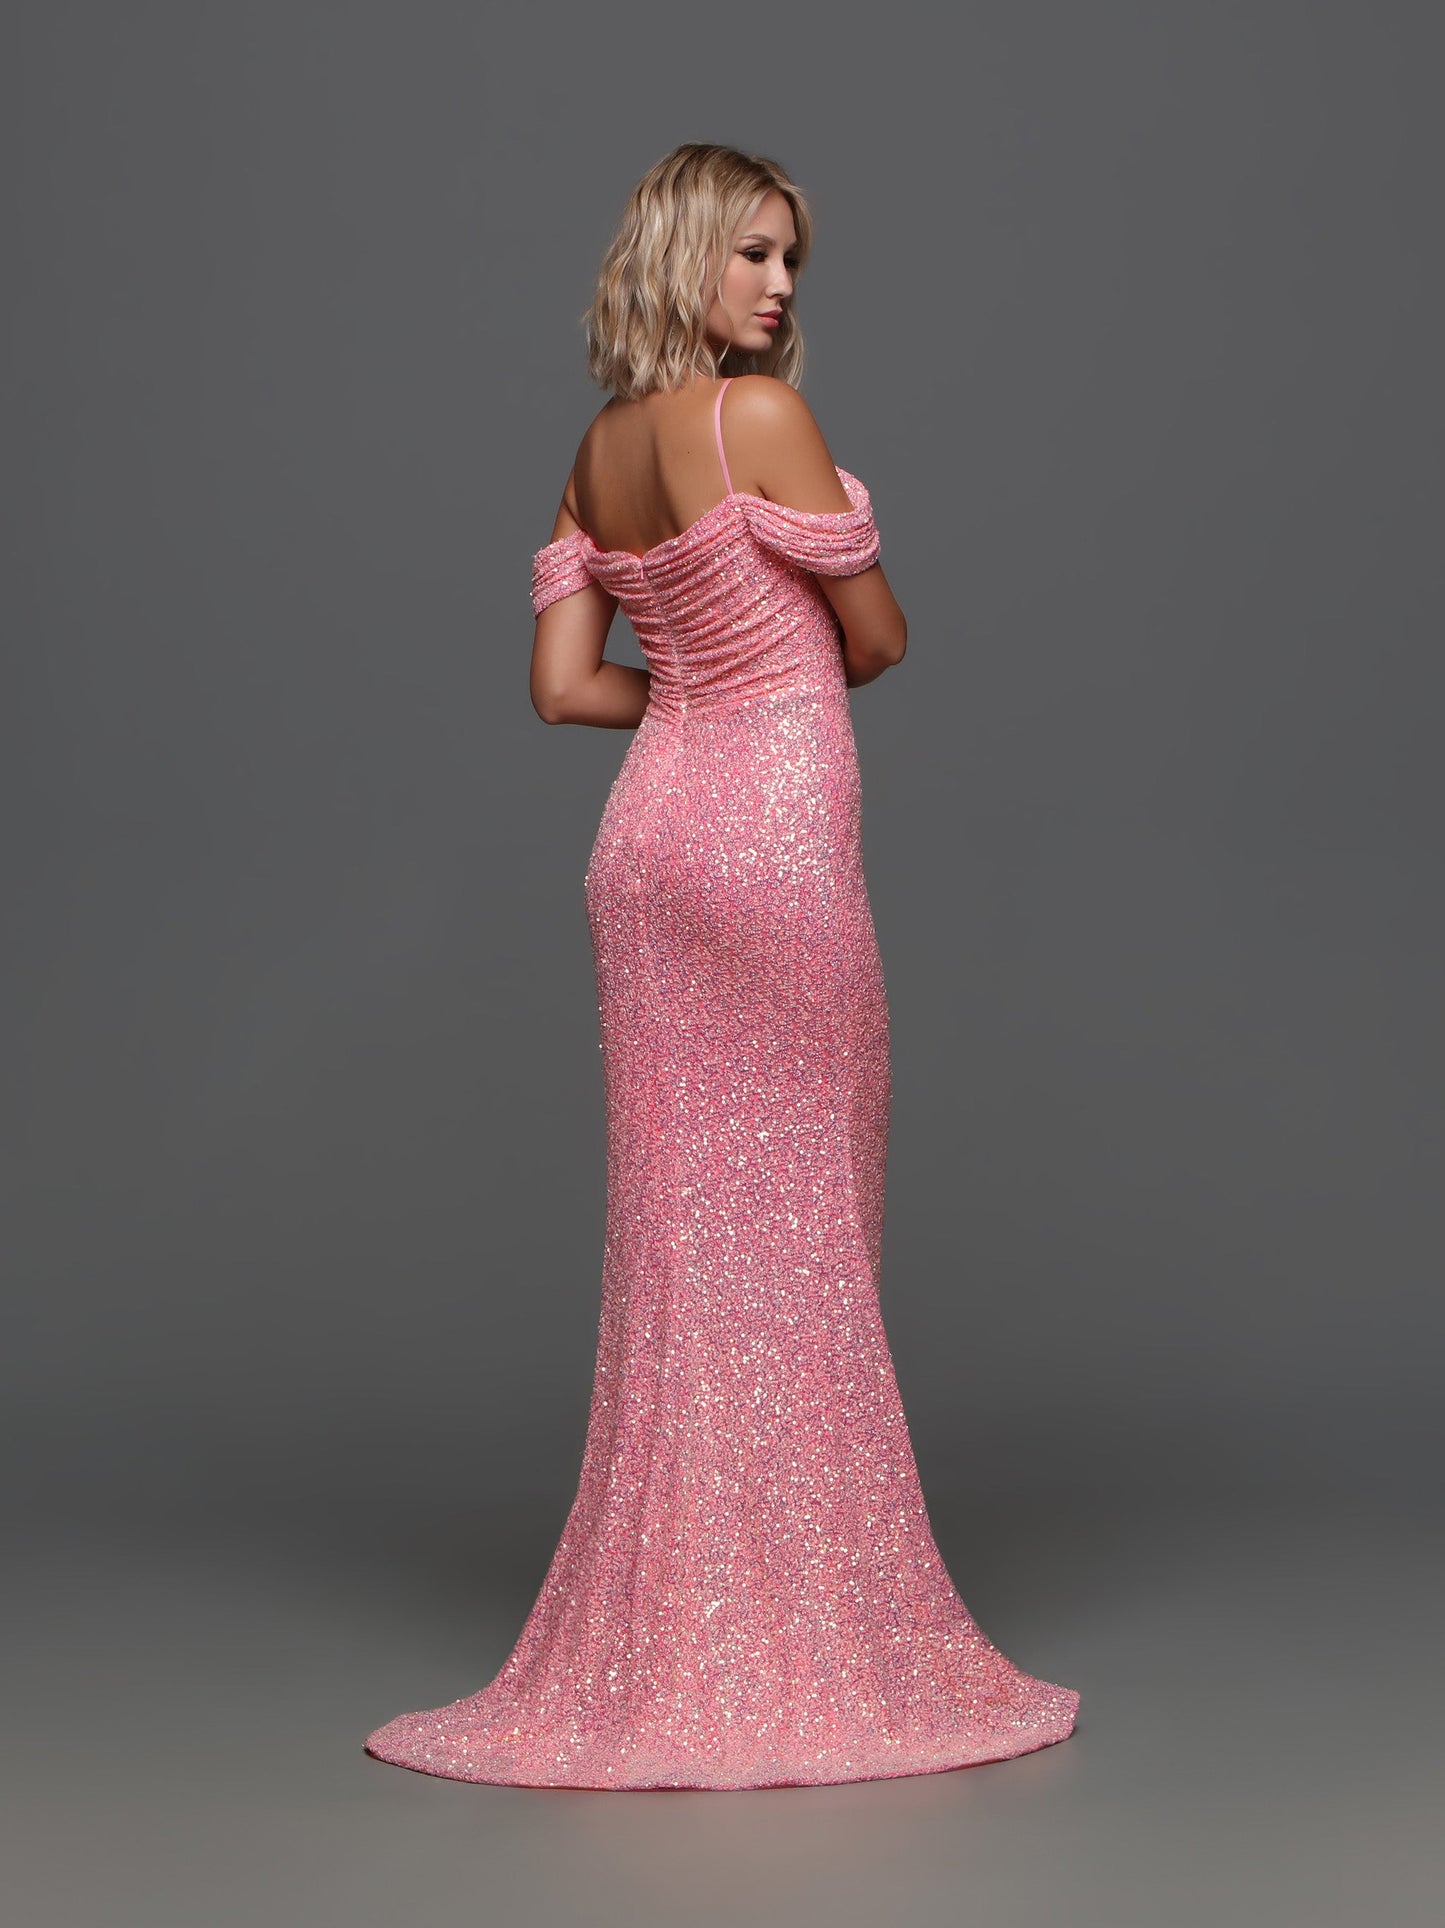 The Candice Wang 72335 Prom Dress is the perfect blend of glamour and sophistication. The sequin corset adds a touch of sparkle, while the high slit and off the shoulder design exude elegance. The scoop neck and ruched details create a flattering silhouette. Elevate your prom night with this stunning dress.  Sizes: 0-20  Colors: Neon Pink